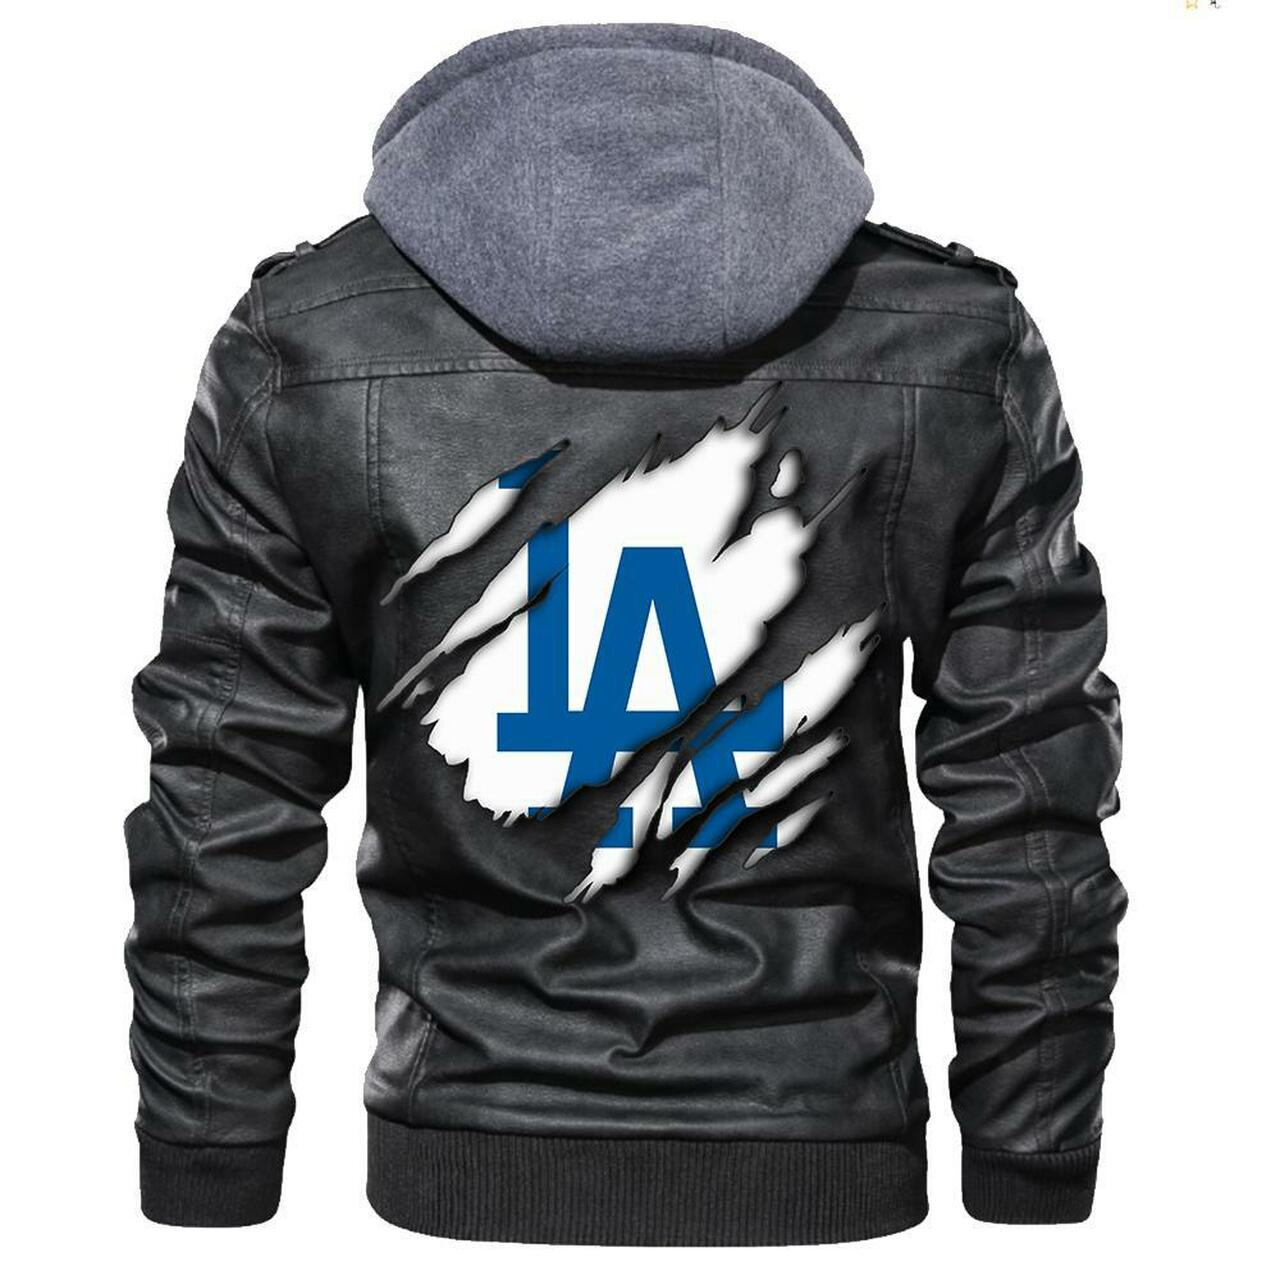 Our store has all of the latest leather jacket 52